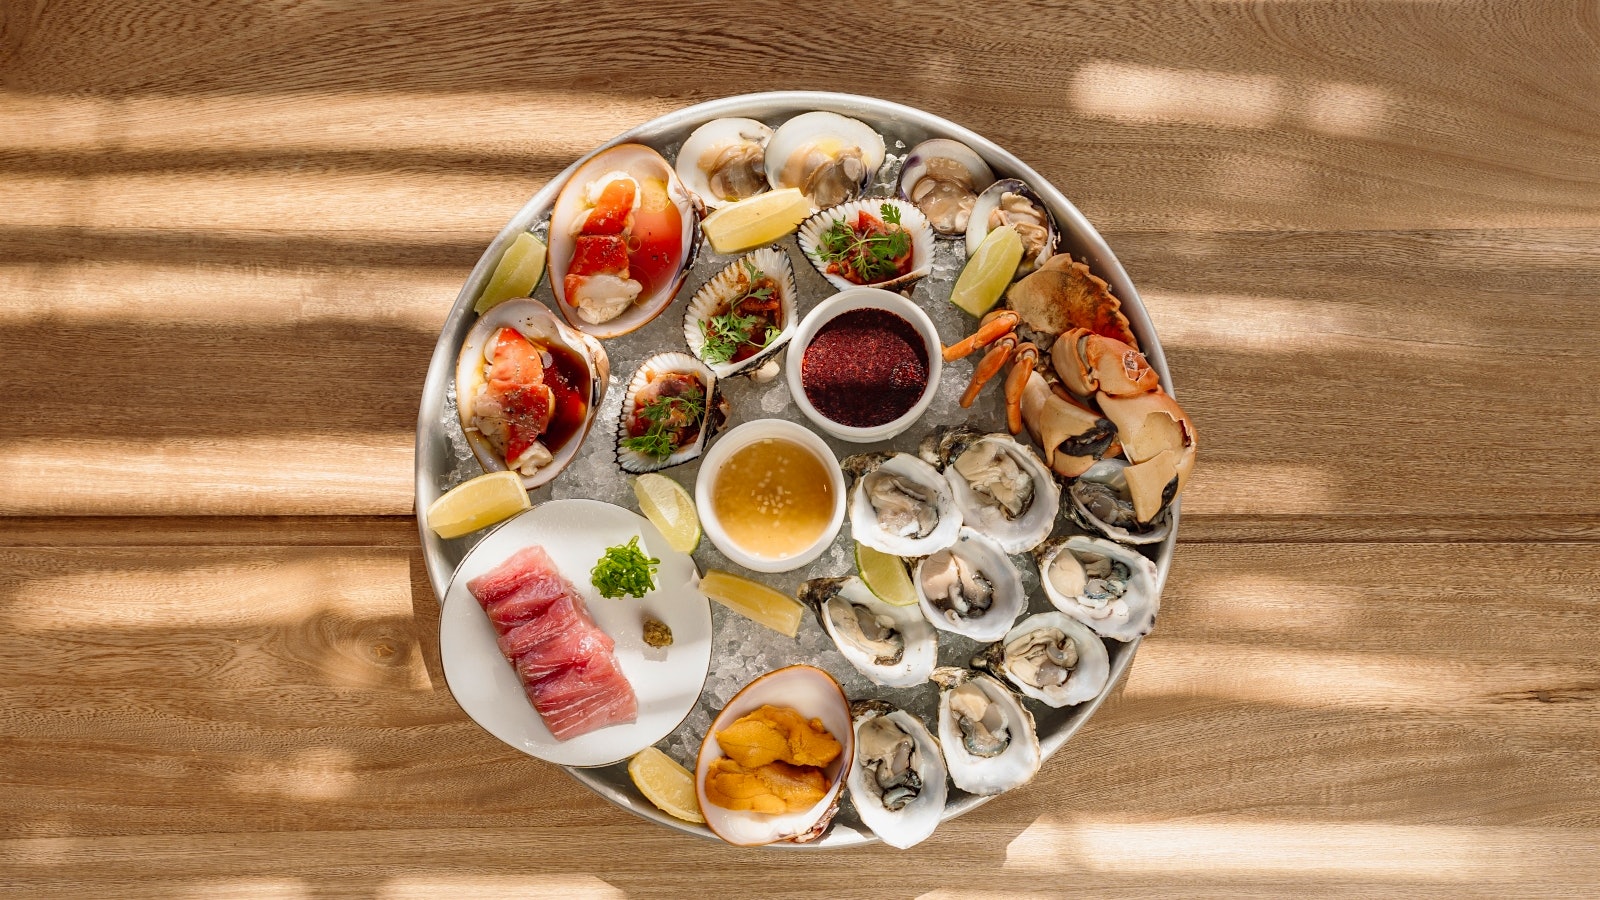  A plate of fresh oysters and other assorted shellfish on ice.